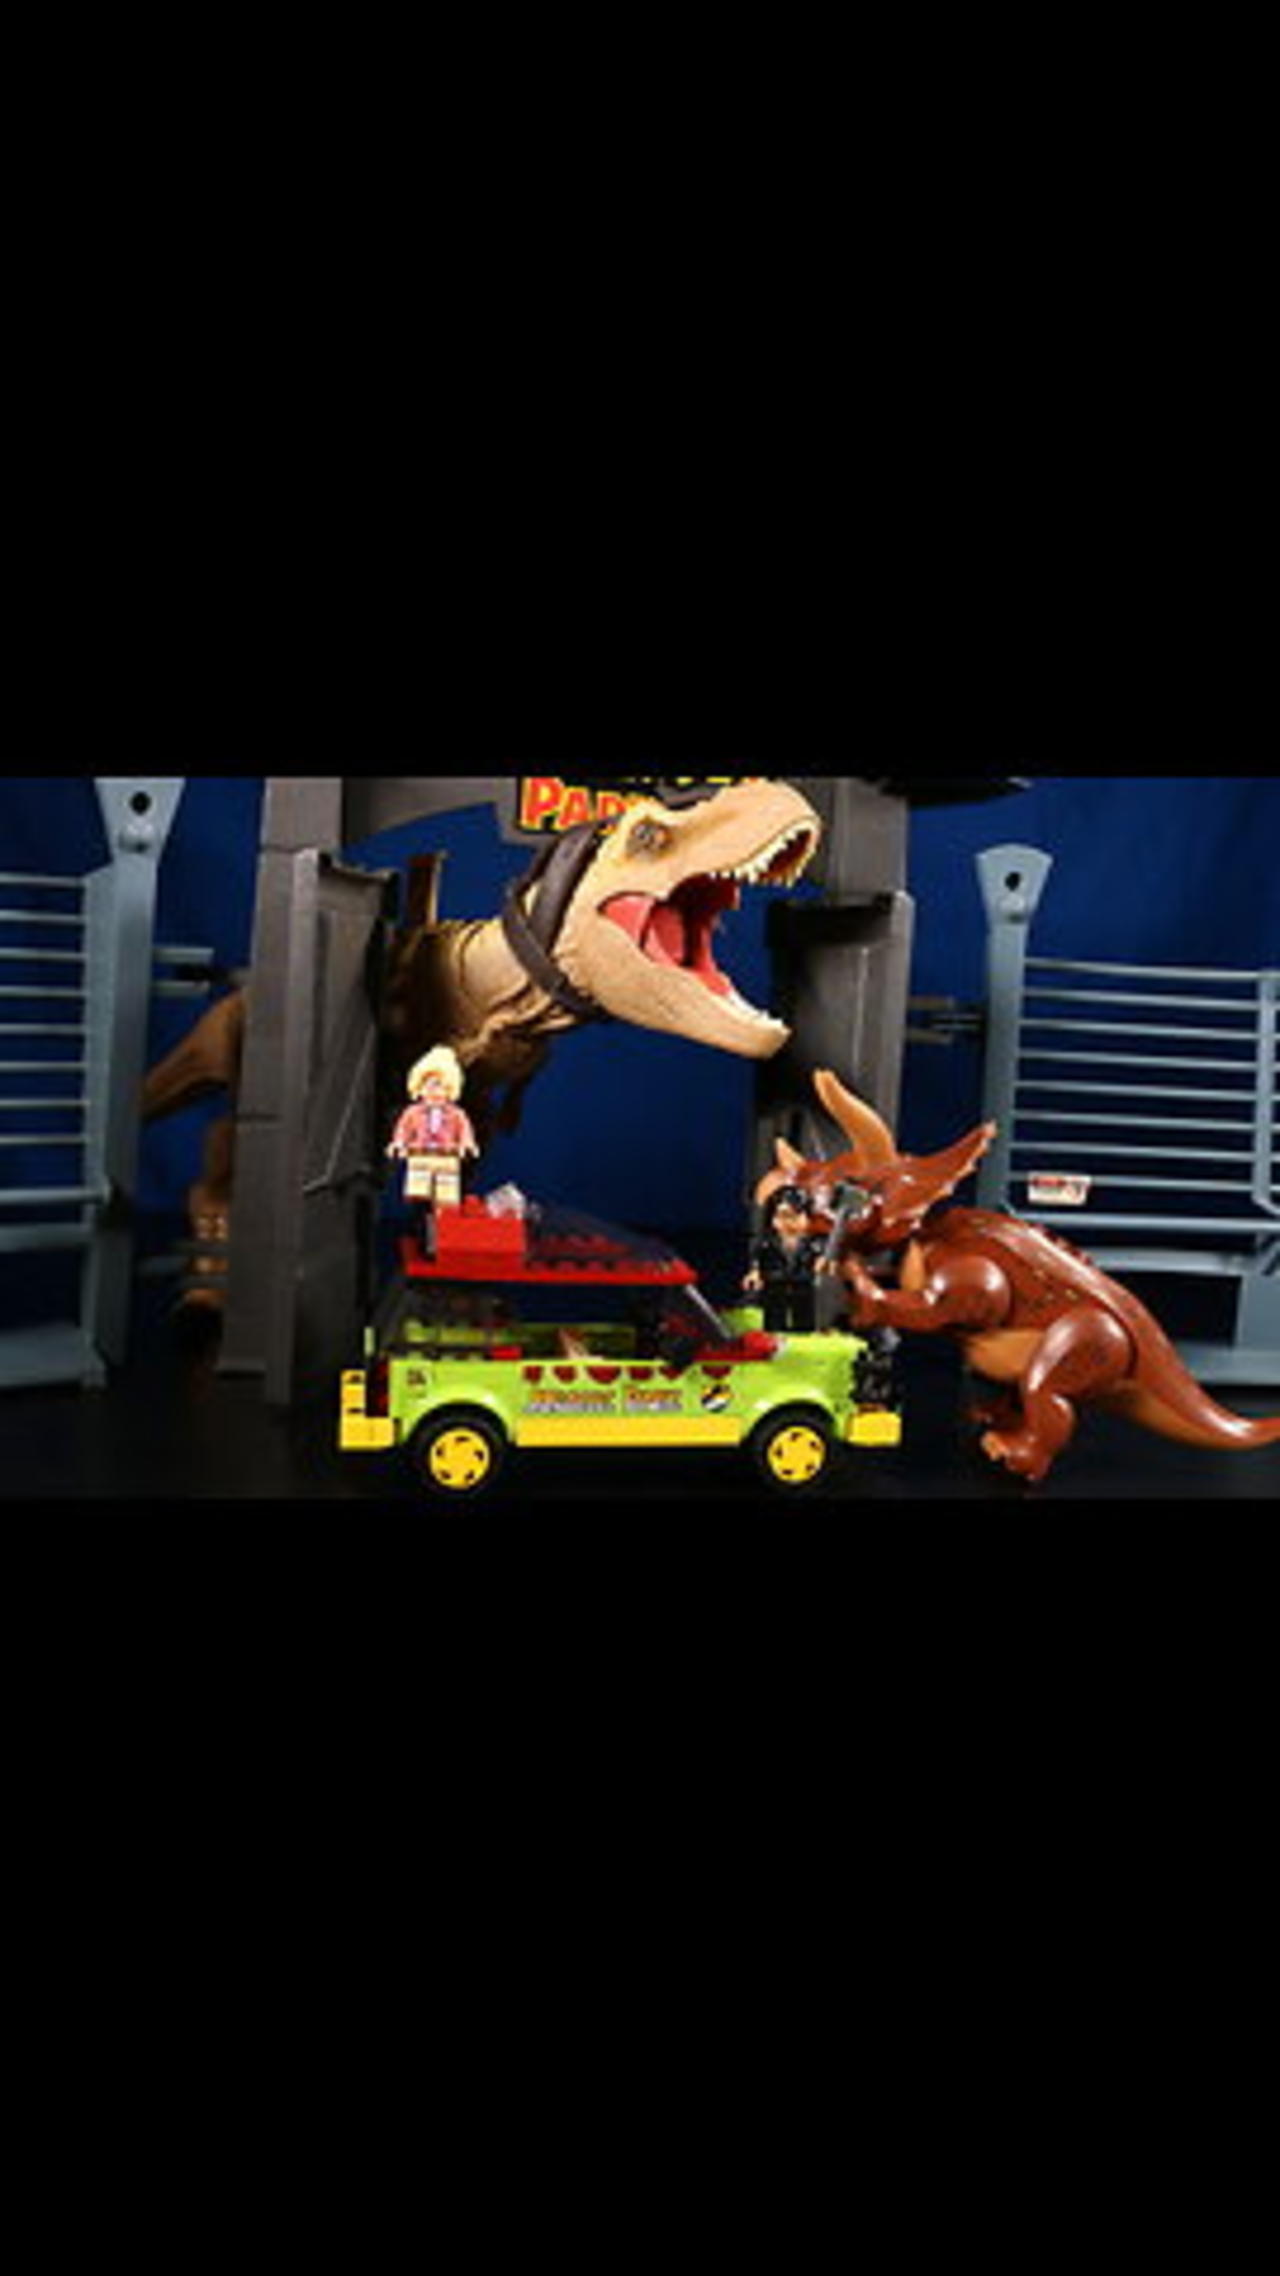 New Lego Jurassic Park Triceratops research 76959 Speed Build Unboxed  Dominion  #shorts #jw4 #jw3